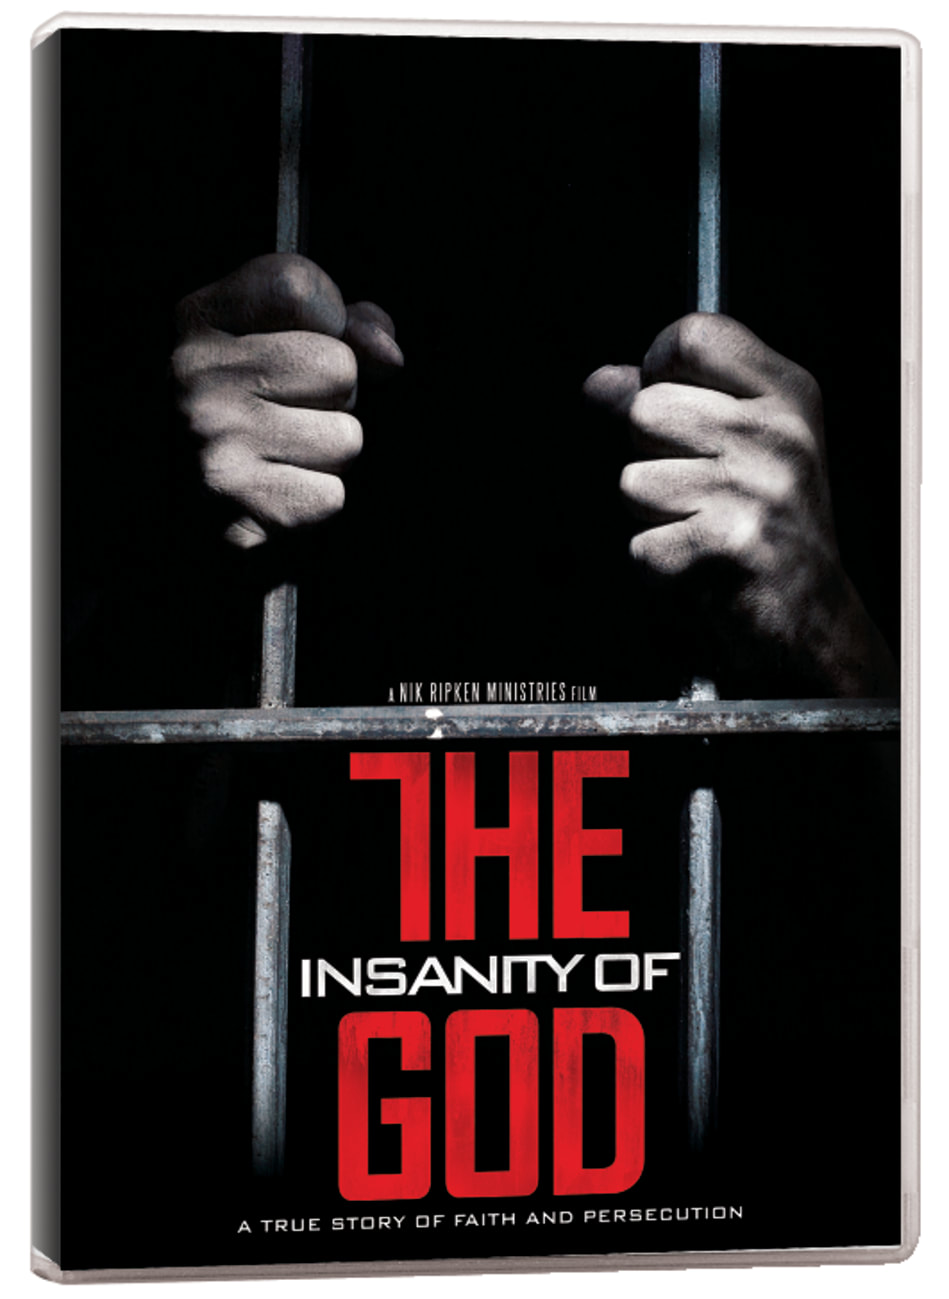 The Insanity of God DVD